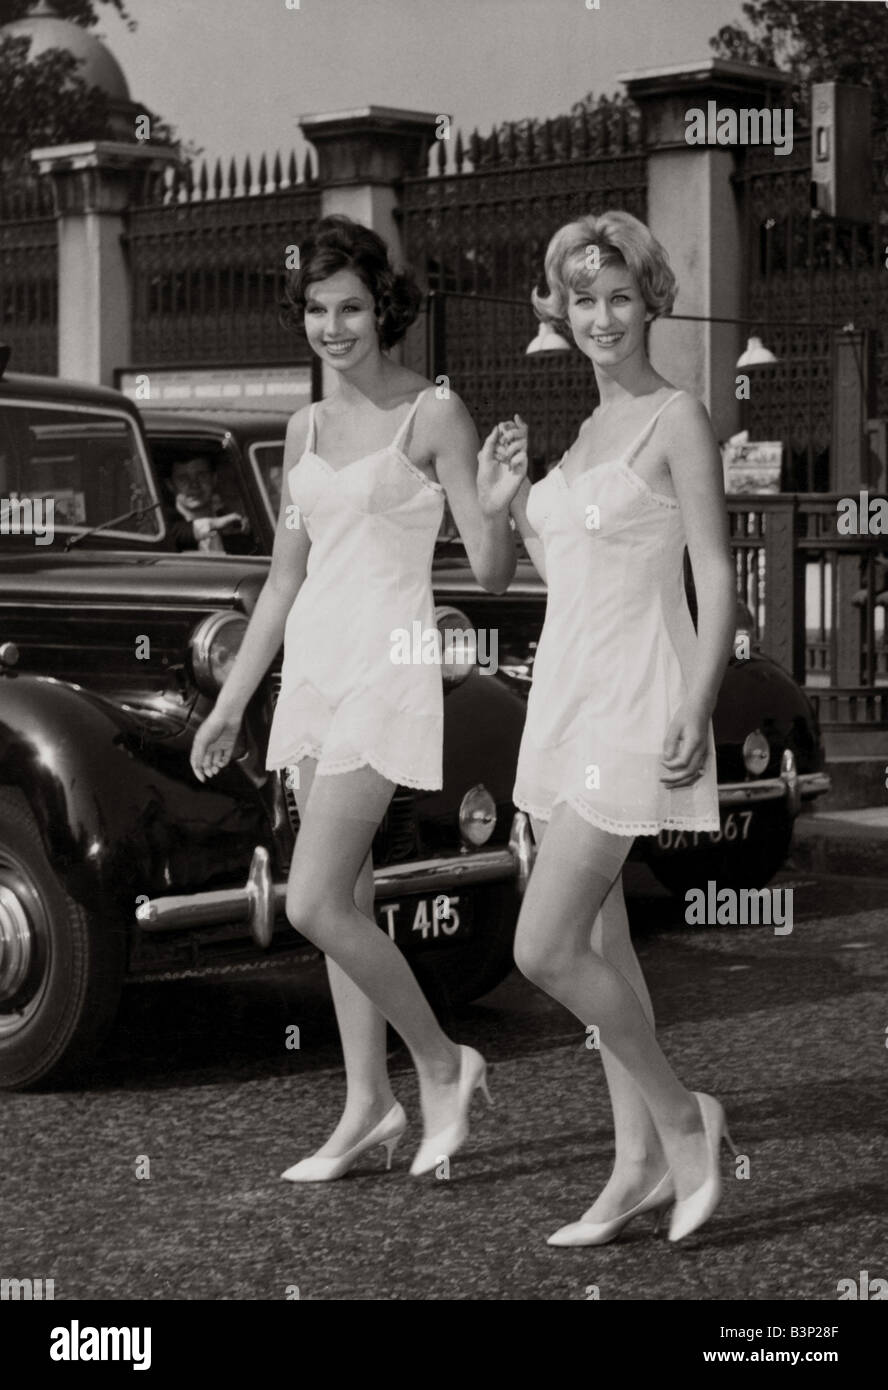 https://c8.alamy.com/comp/B3P28F/two-models-walking-by-hyde-park-corner-wearing-their-slips-after-slipping-B3P28F.jpg